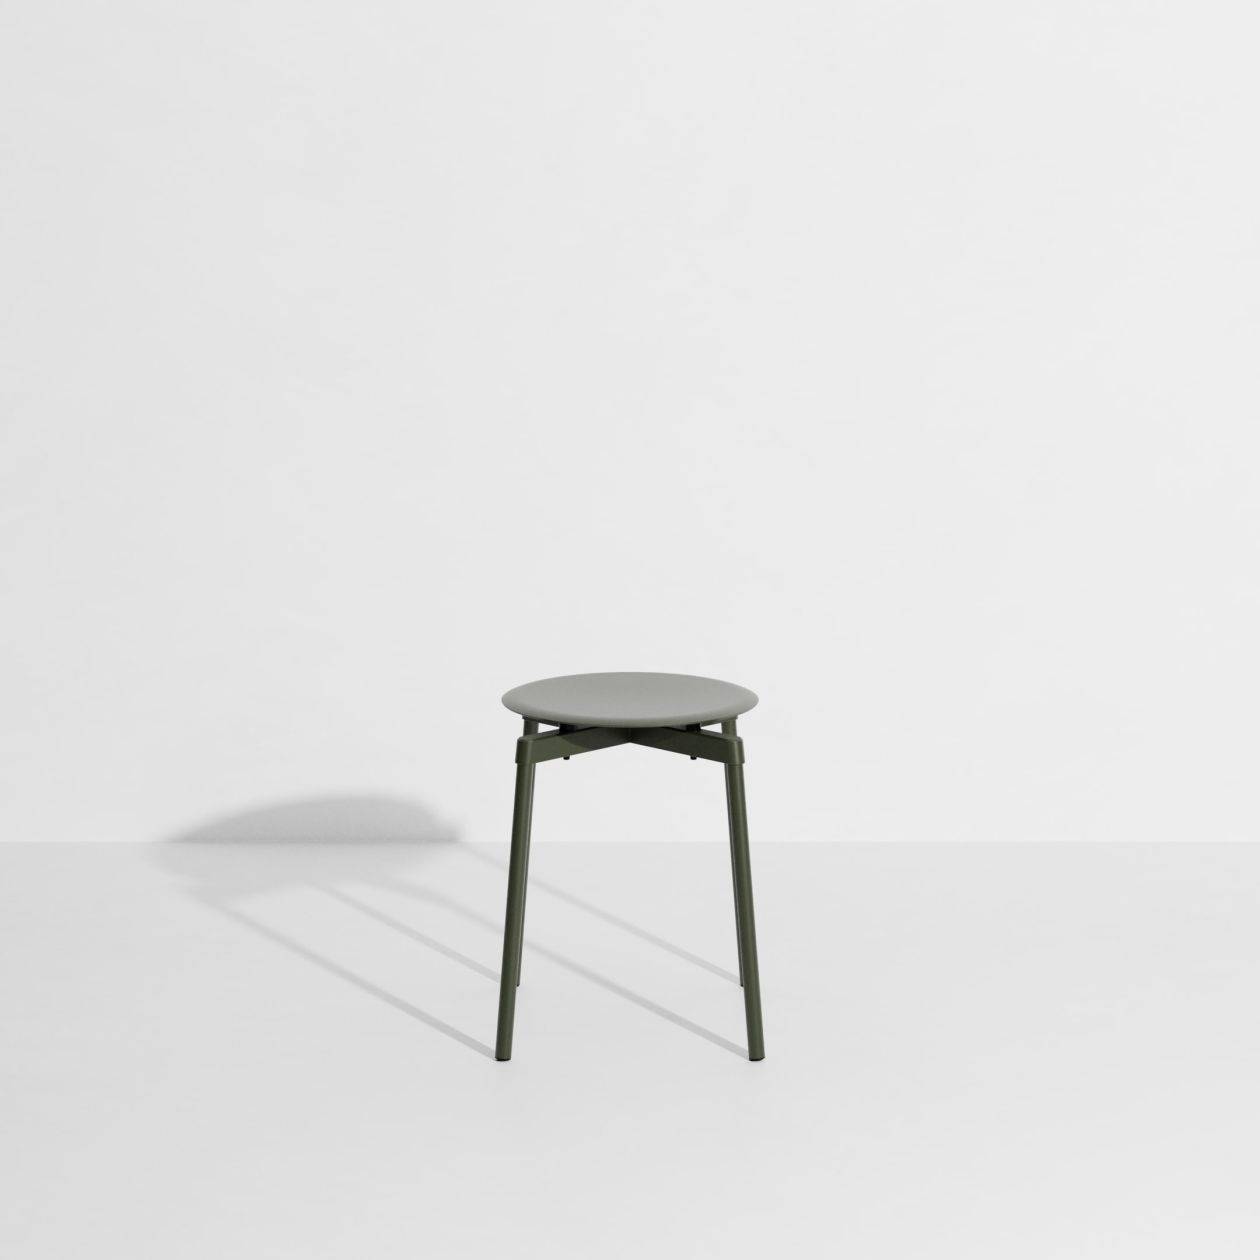 Fromme Stool - Glass green